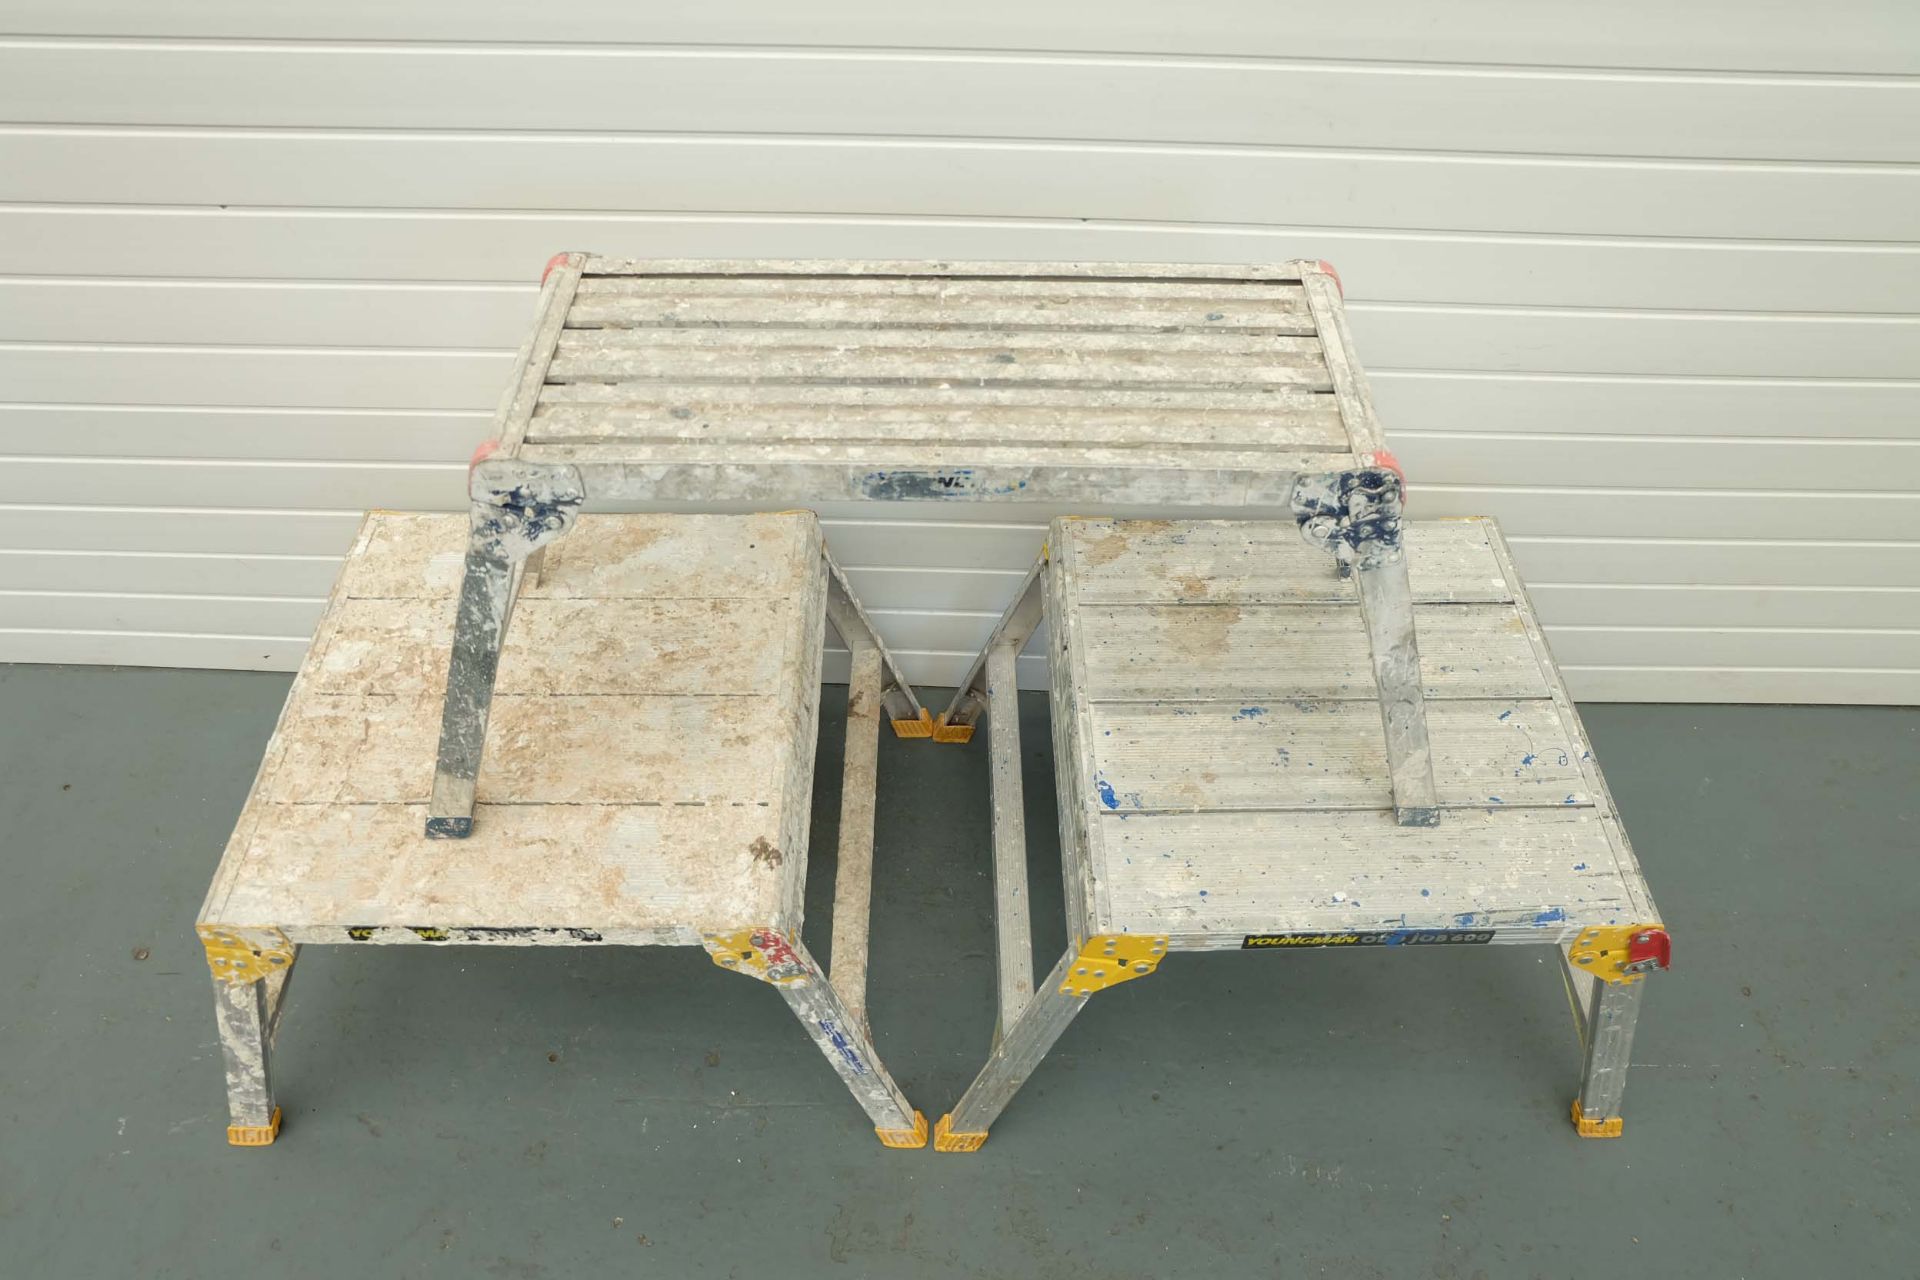 3 x Aluminium Platforms. 2 x Youngman 600 x 600mm. Height: 500mm. And Werner 700 x 300mm. - Image 2 of 5